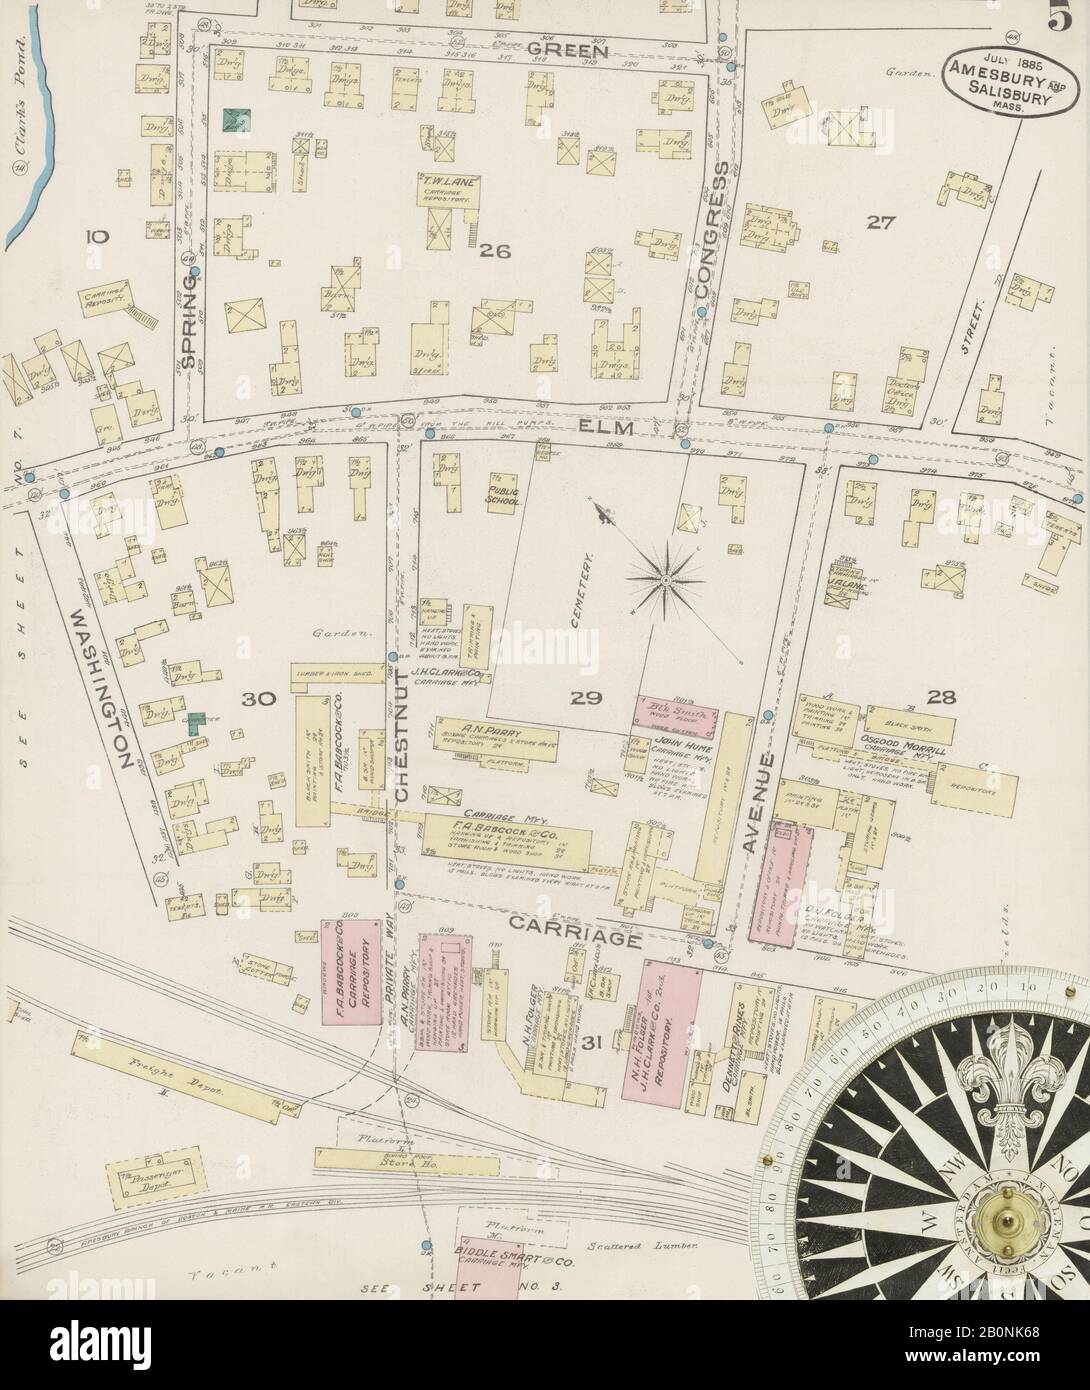 Image 5 of Sanborn Fire Insurance Map from Amesbury, Essex County, Massachusetts. Jul 1885. 8 Sheet(s). Includes Salisbury, America, street map with a Nineteenth Century compass Stock Photo